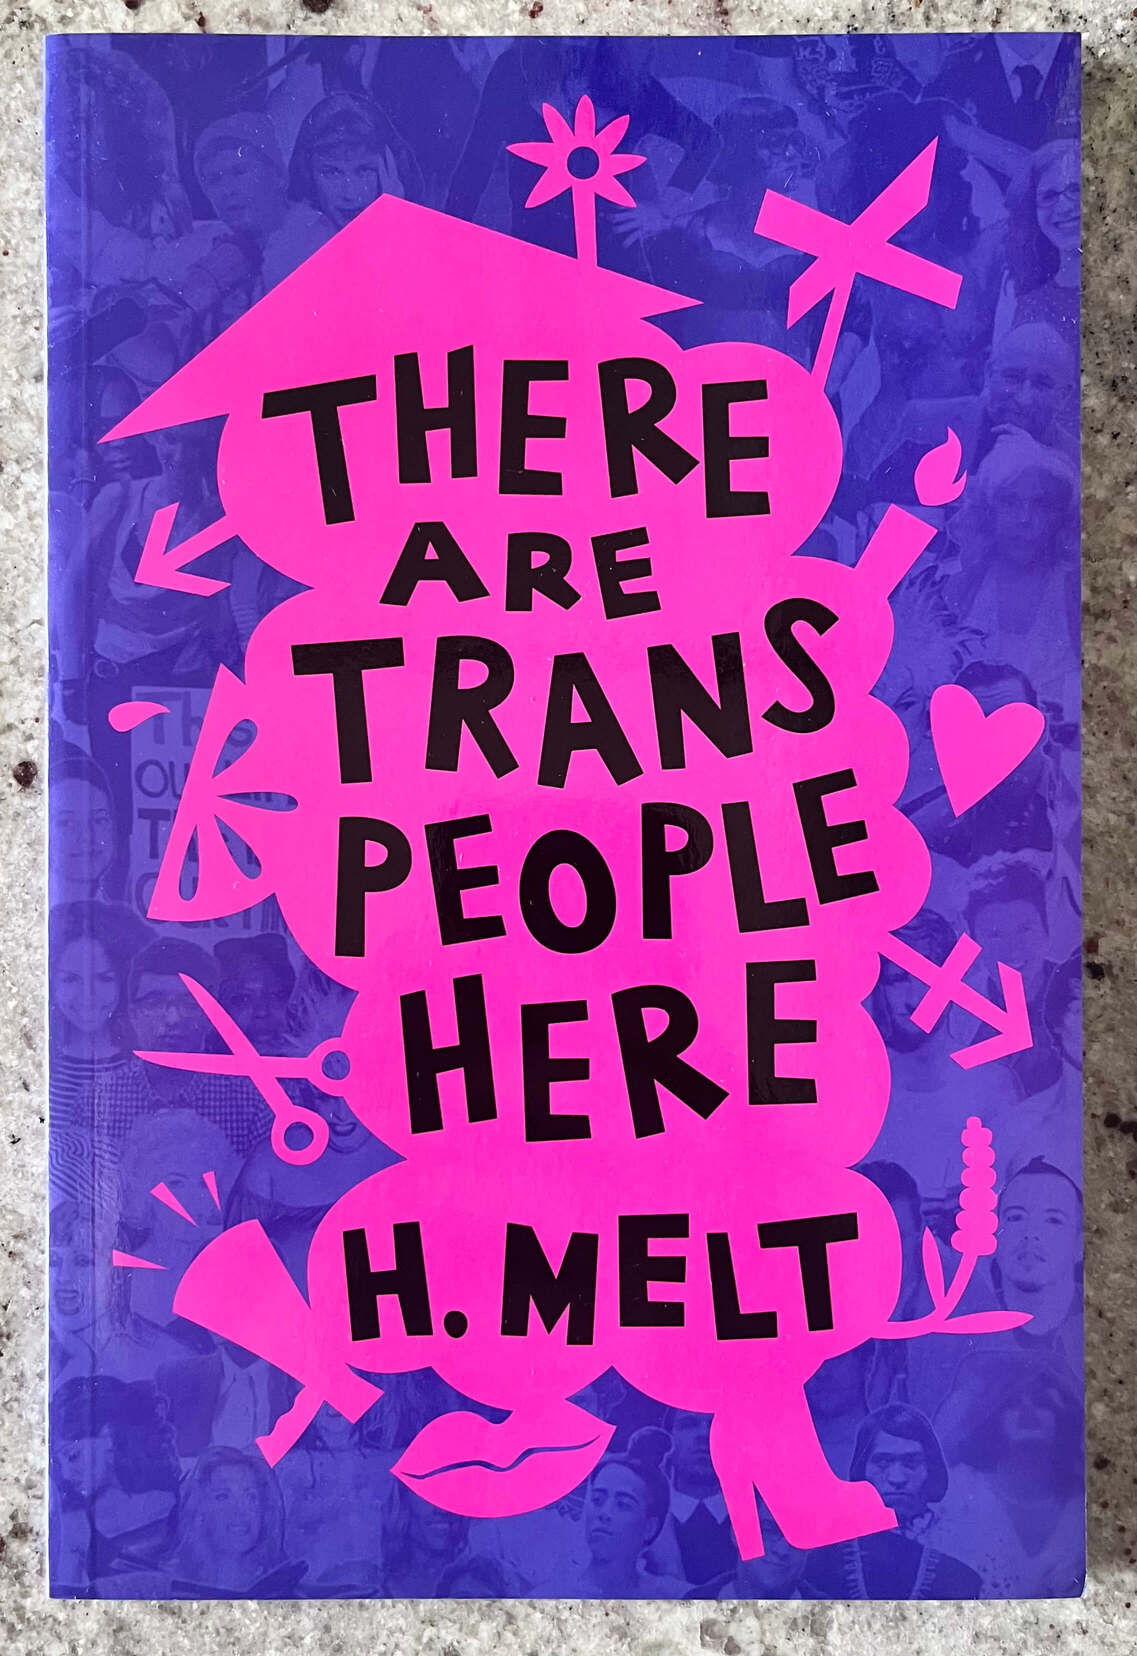 “There are Trans People Here” by H. Melt.